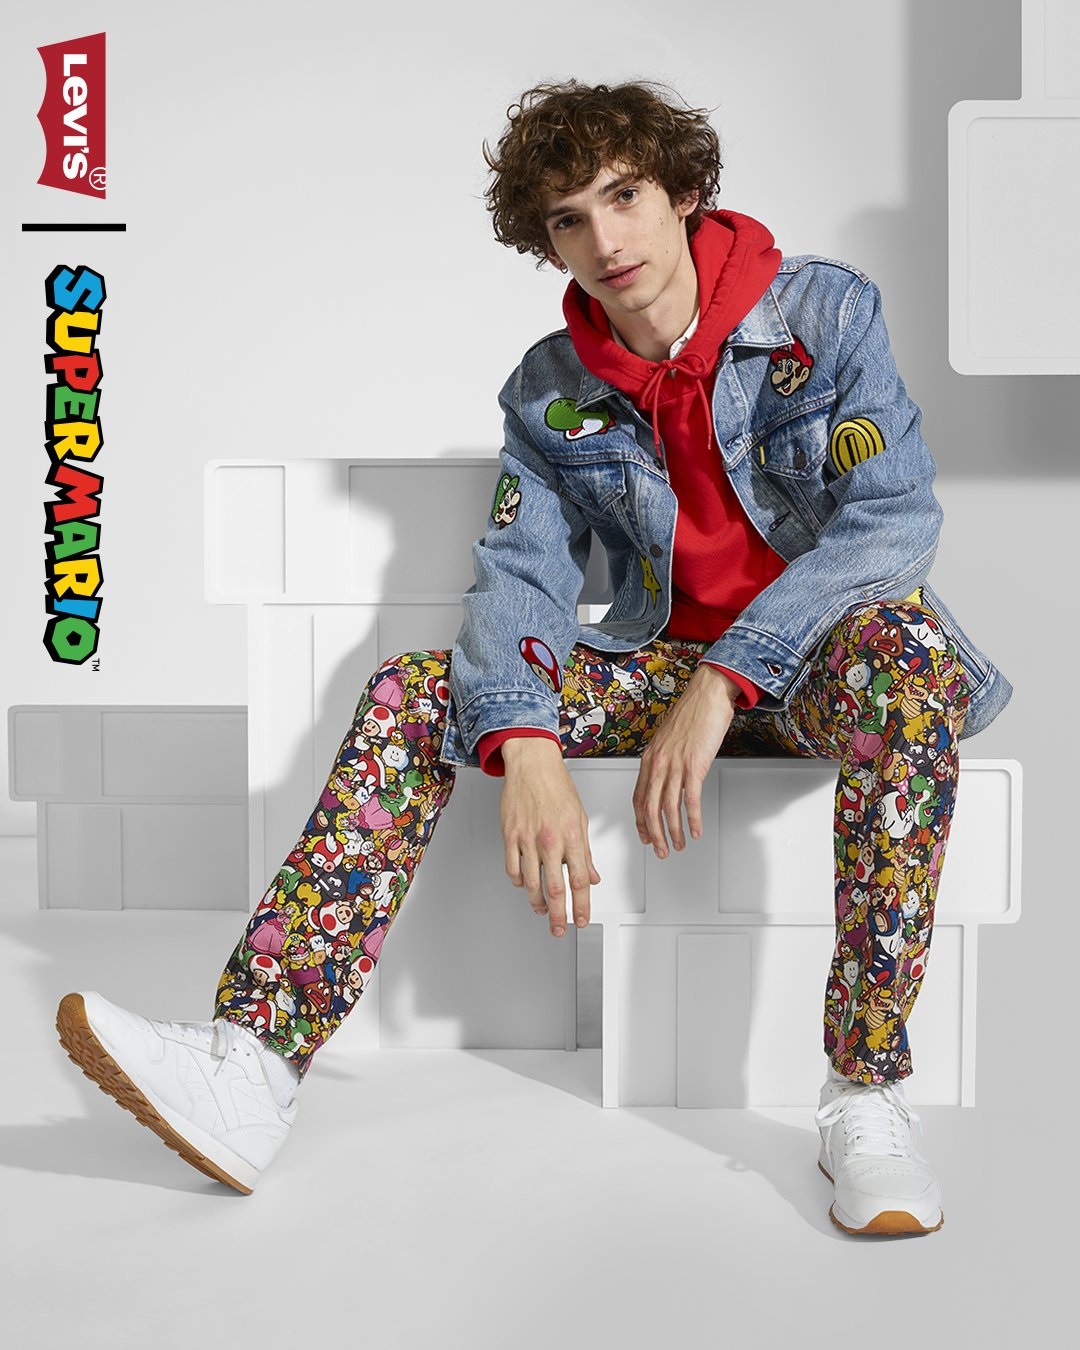 Levi's x Super Mario collection seeing a delay in North and South America  due to coronavirus